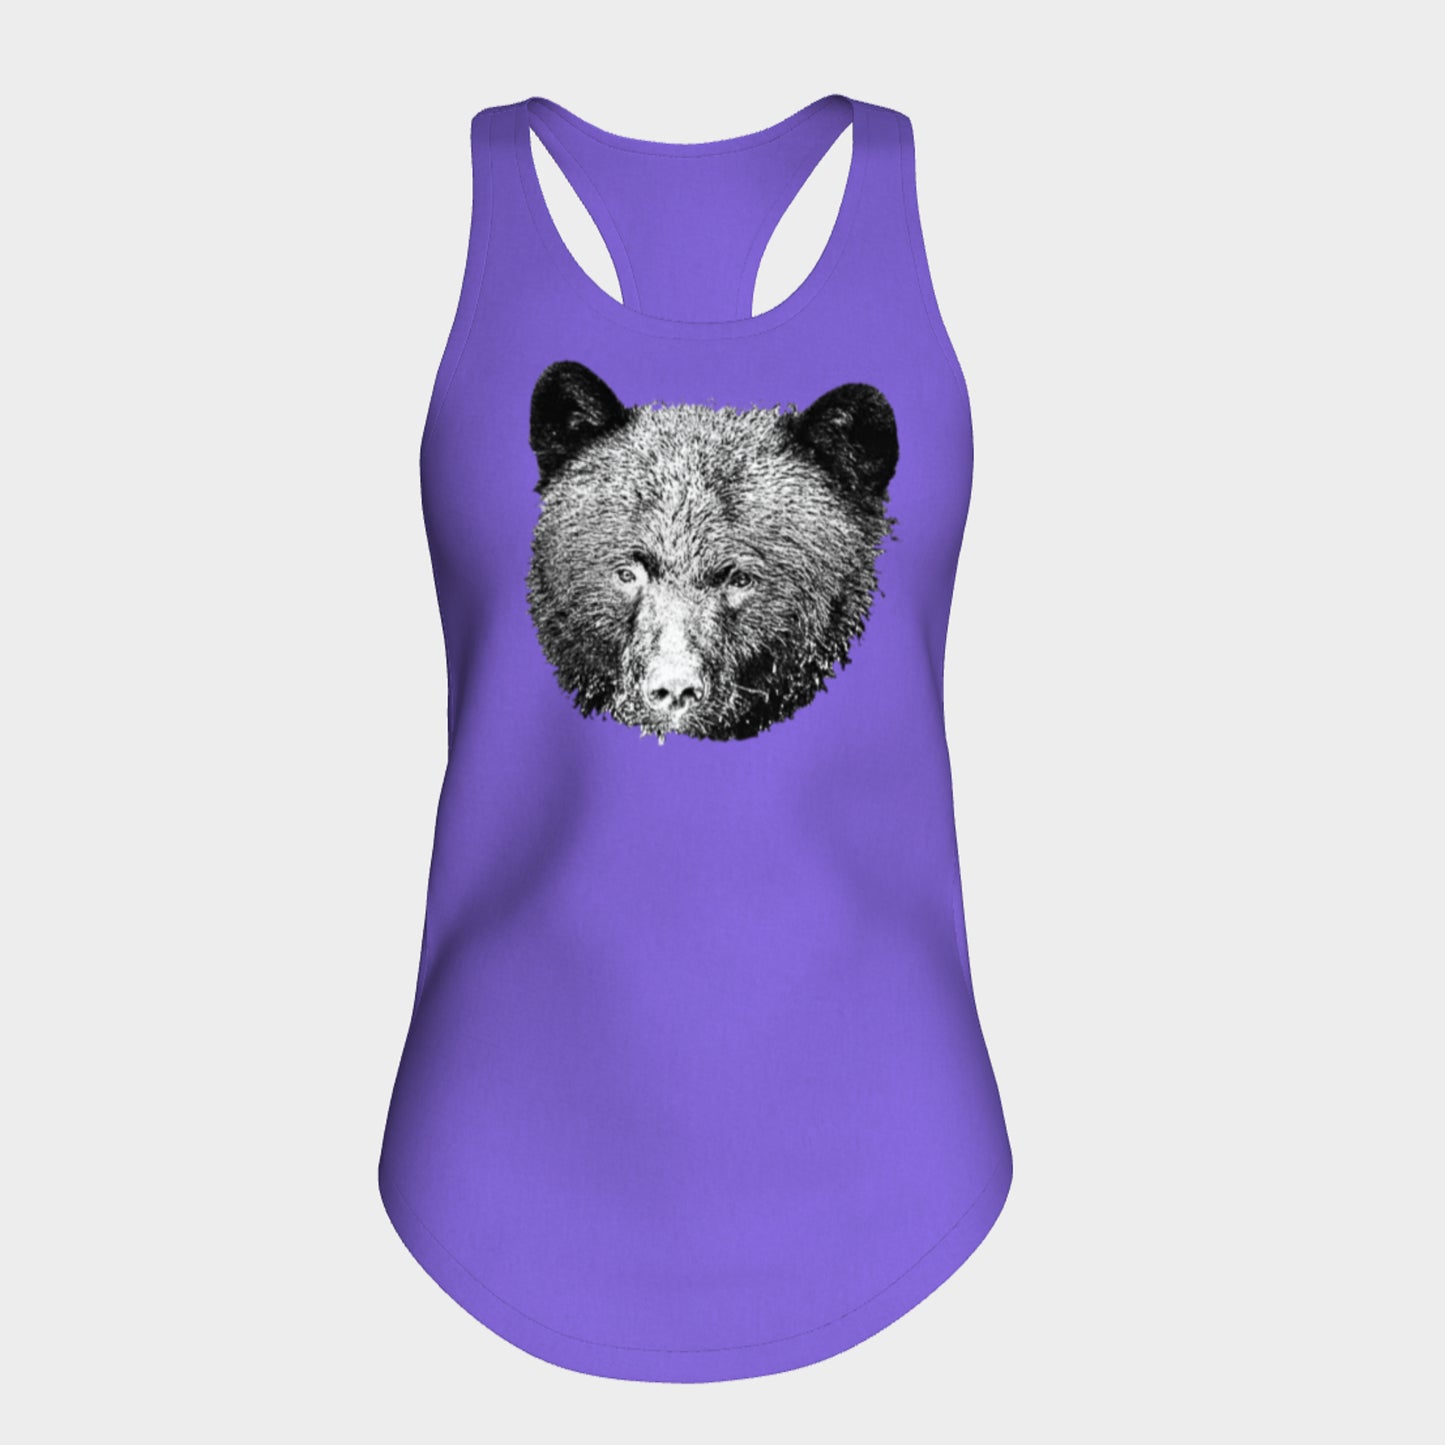 Bear Head Racerback tank top in tahiti blue made from a cotton polyester blend.